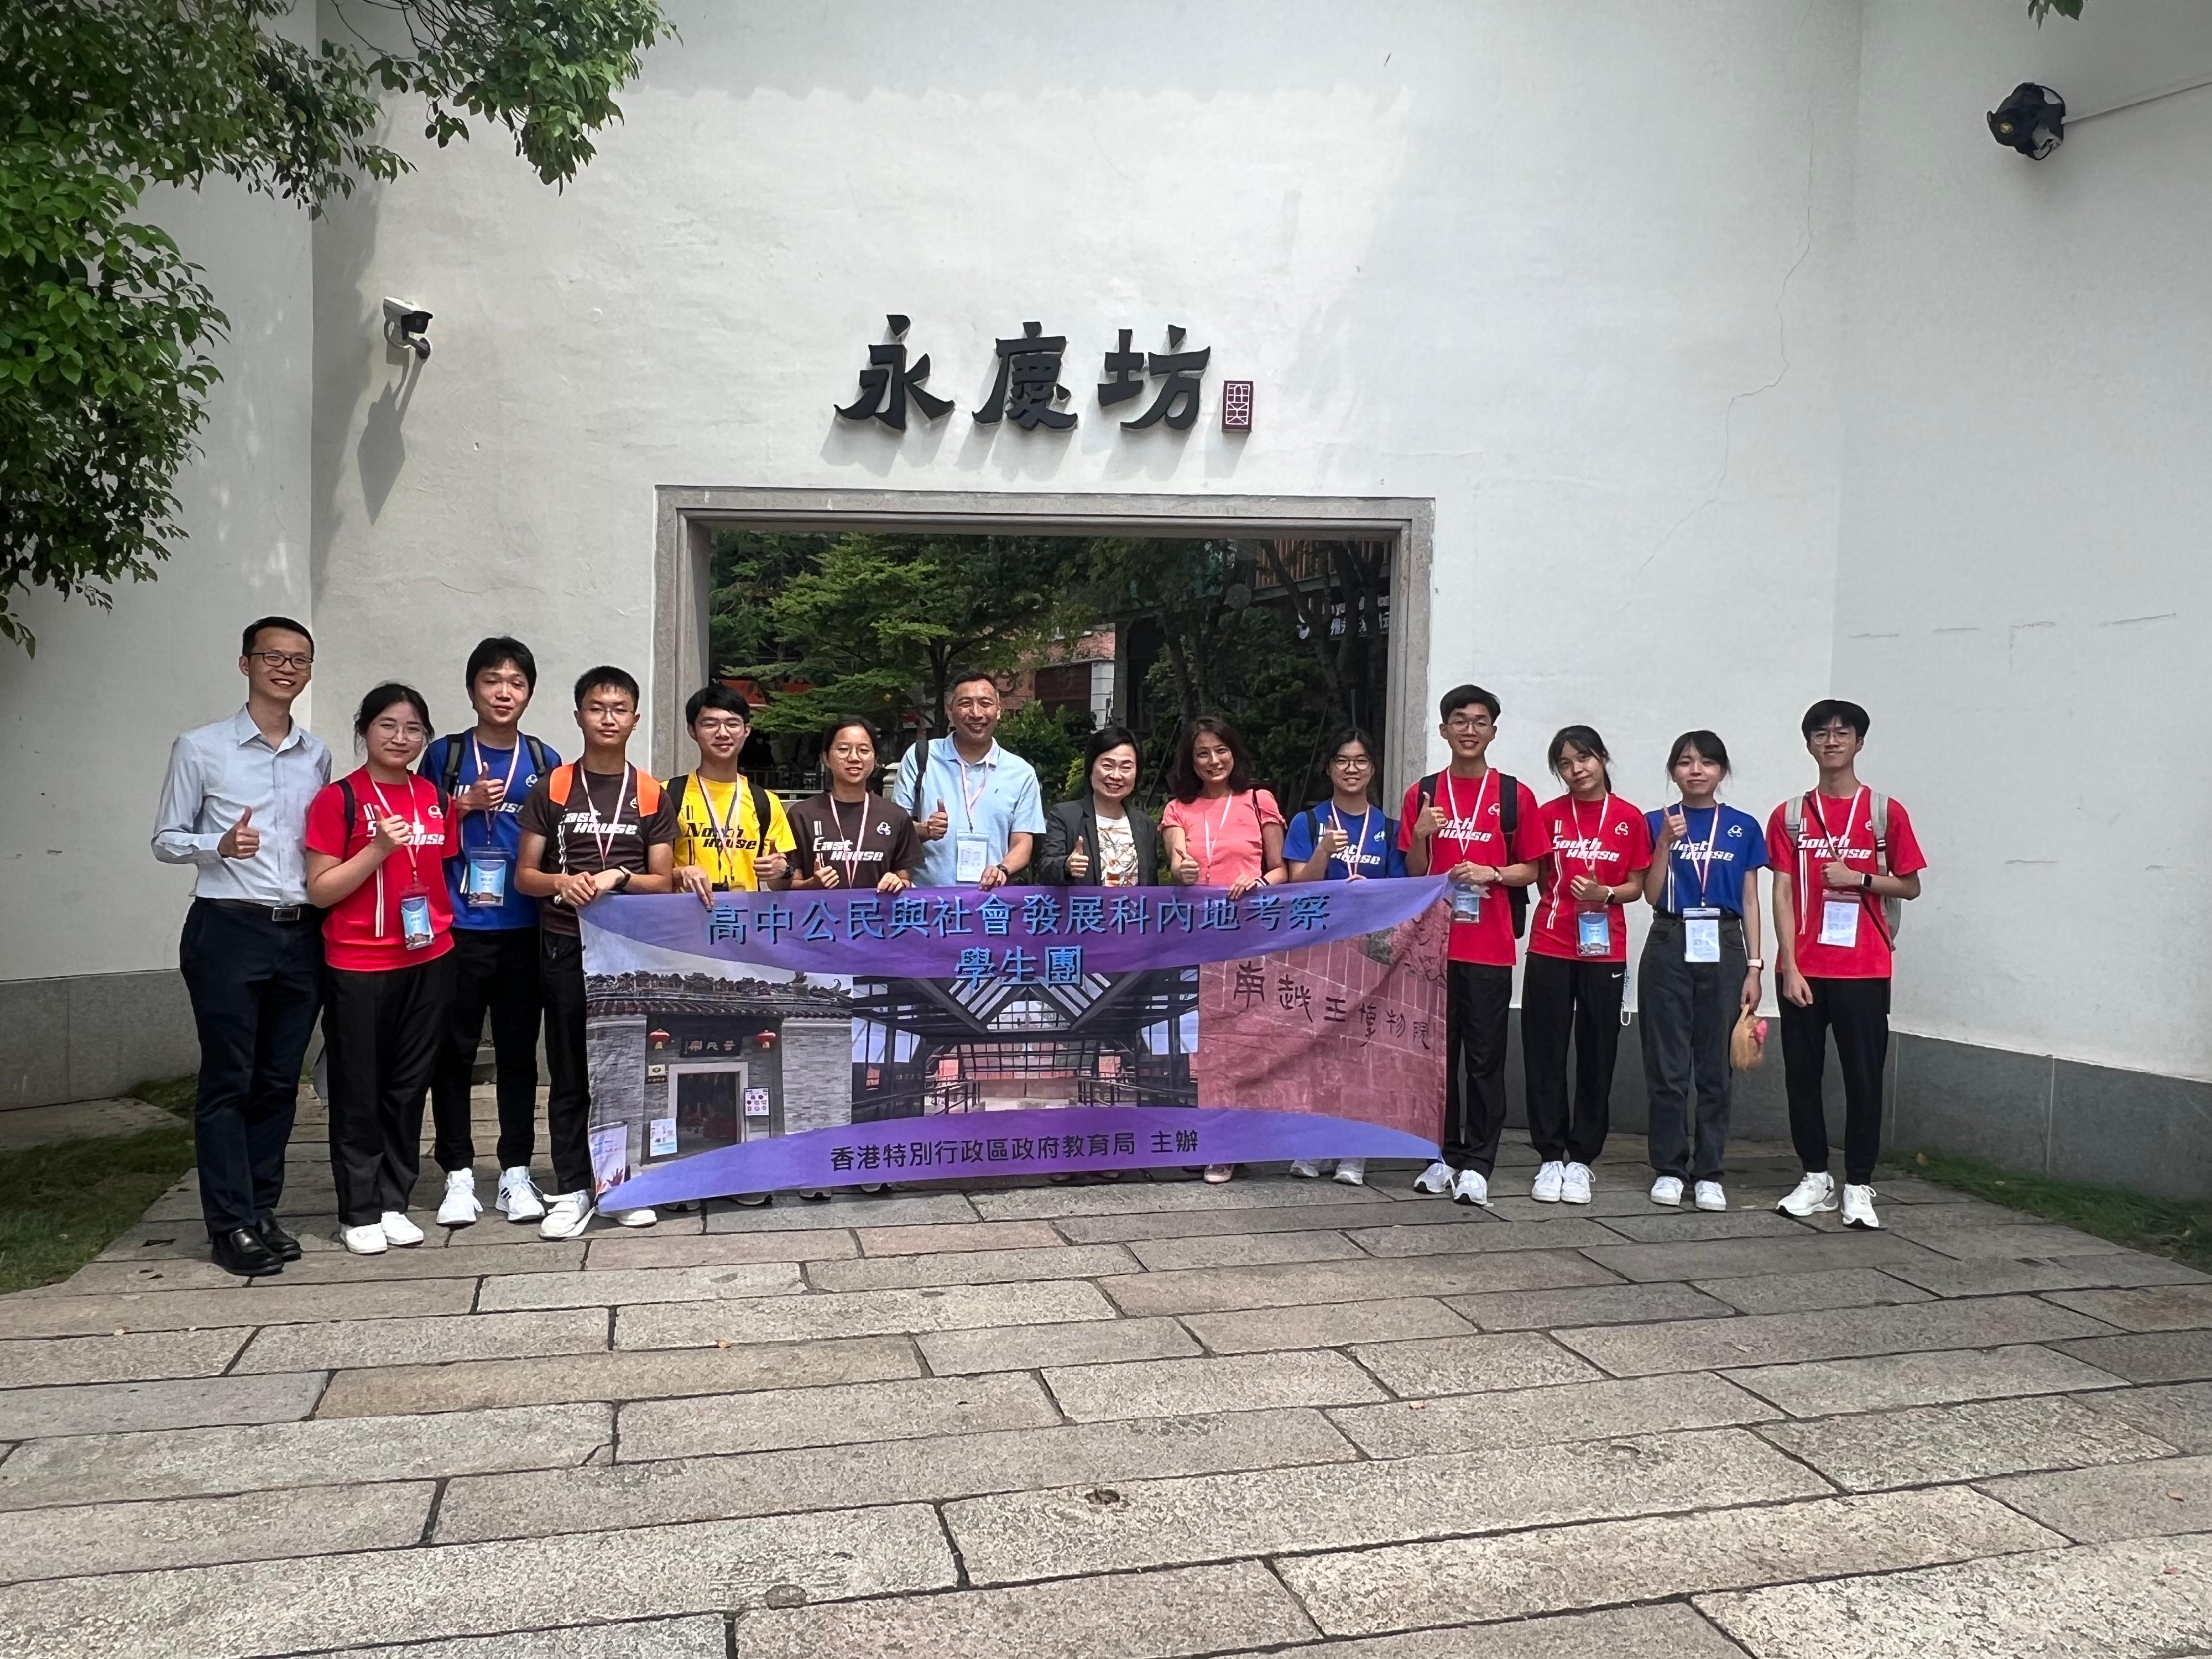 The Secretary for Education, Dr Choi Yuk-lin, met Hong Kong students joining a Mainland study tour on the subject of Citizenship and Social Development in Guangzhou yesterday (July 21). Photo shows Dr Choi (seventh right) with the teachers and students of the tour at Yongqing Fang.